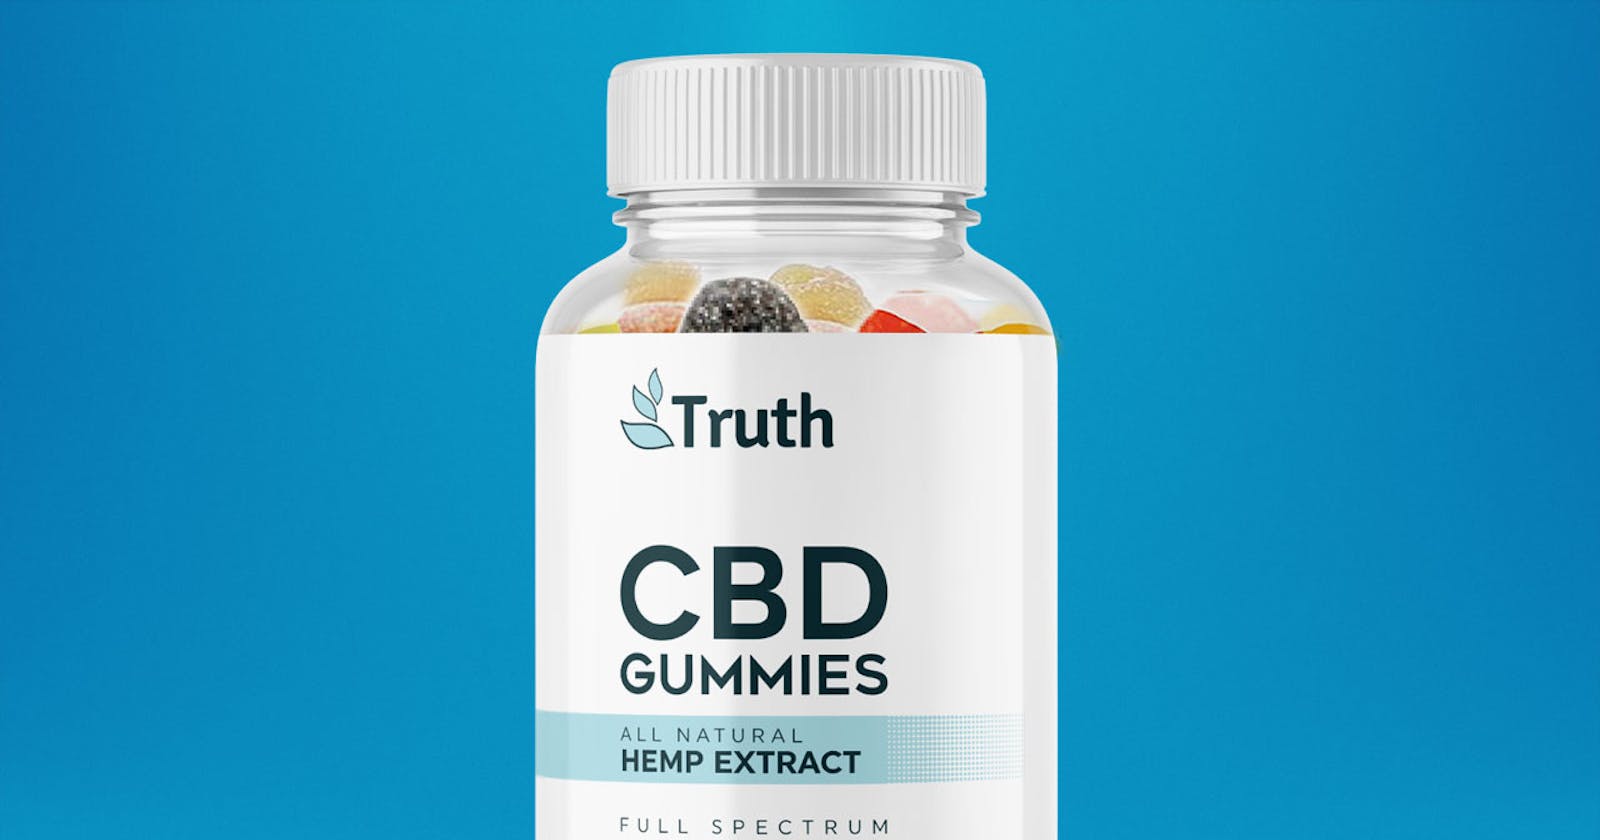 Truth Male Enhancement CBD Gummies Reviews, Results, Where To Buy?